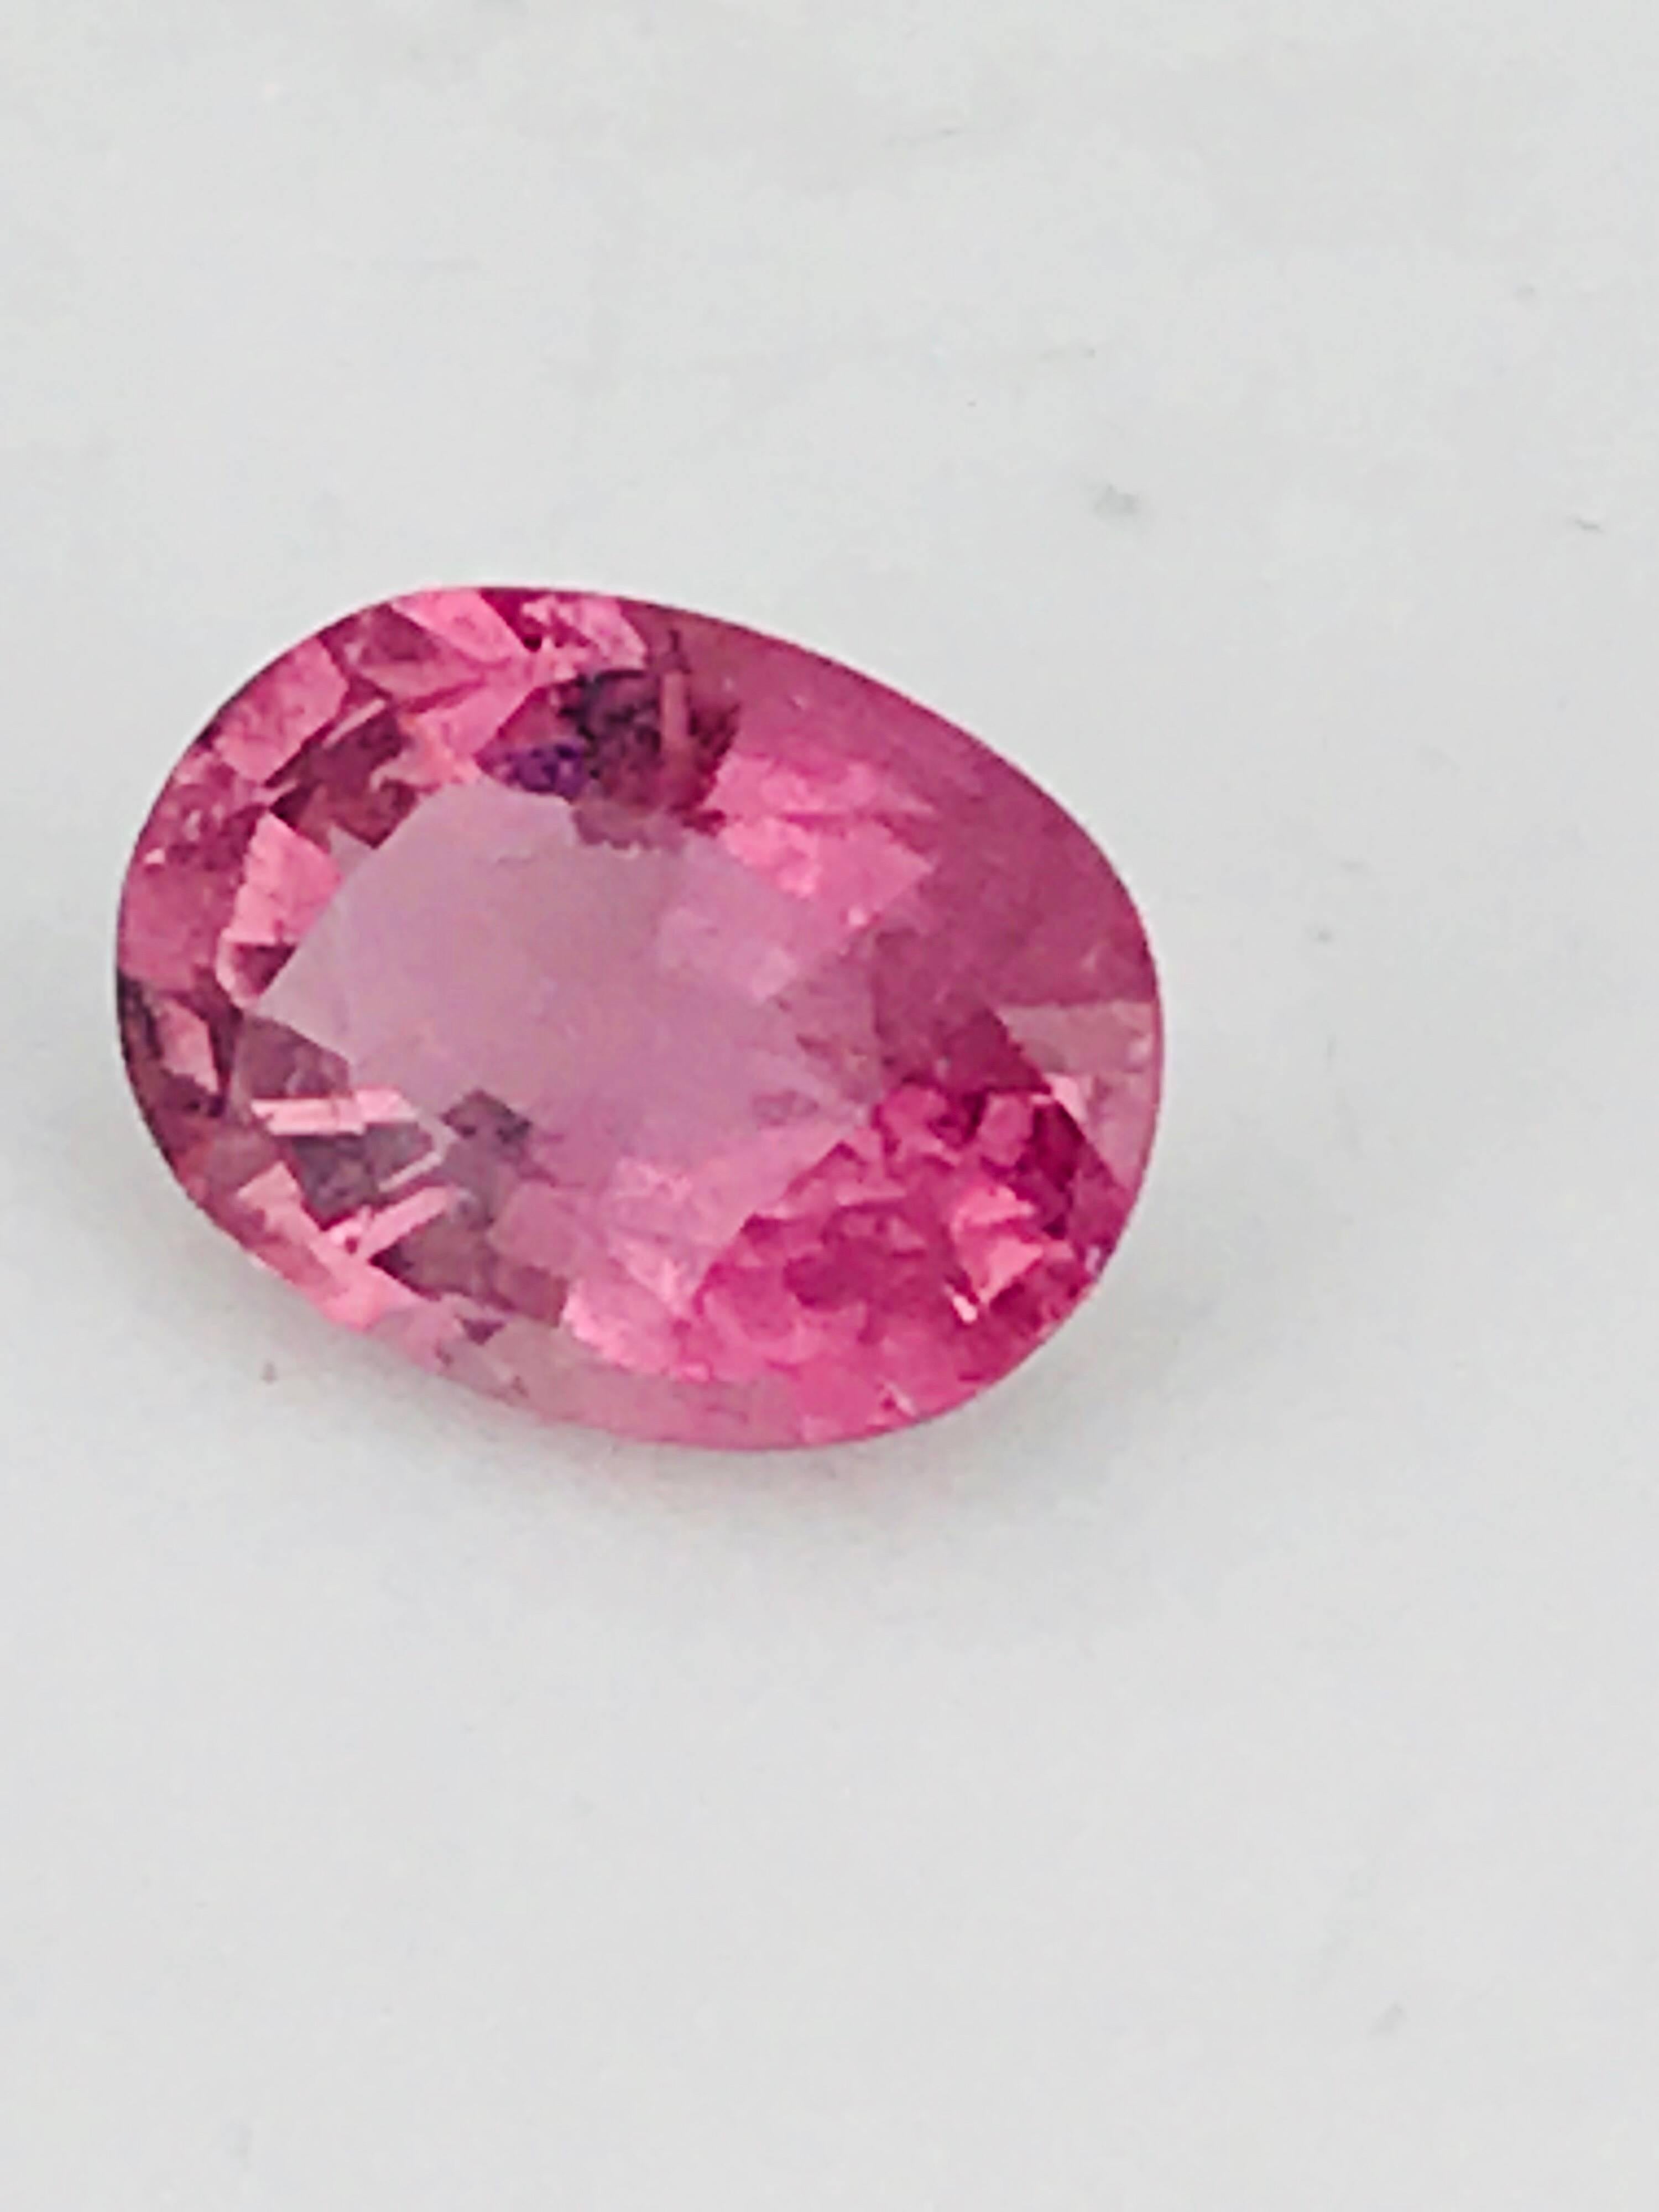 Very rare, Cuprian Elbaite, Pink Tourmaline gemstone weighing 2.13 carat.
The stone is from Mozambique and measures 6.84 x 9 x 4.3 millimeters in diameter 
Beautiful color.

GIA Gemologist inspected and evaluated